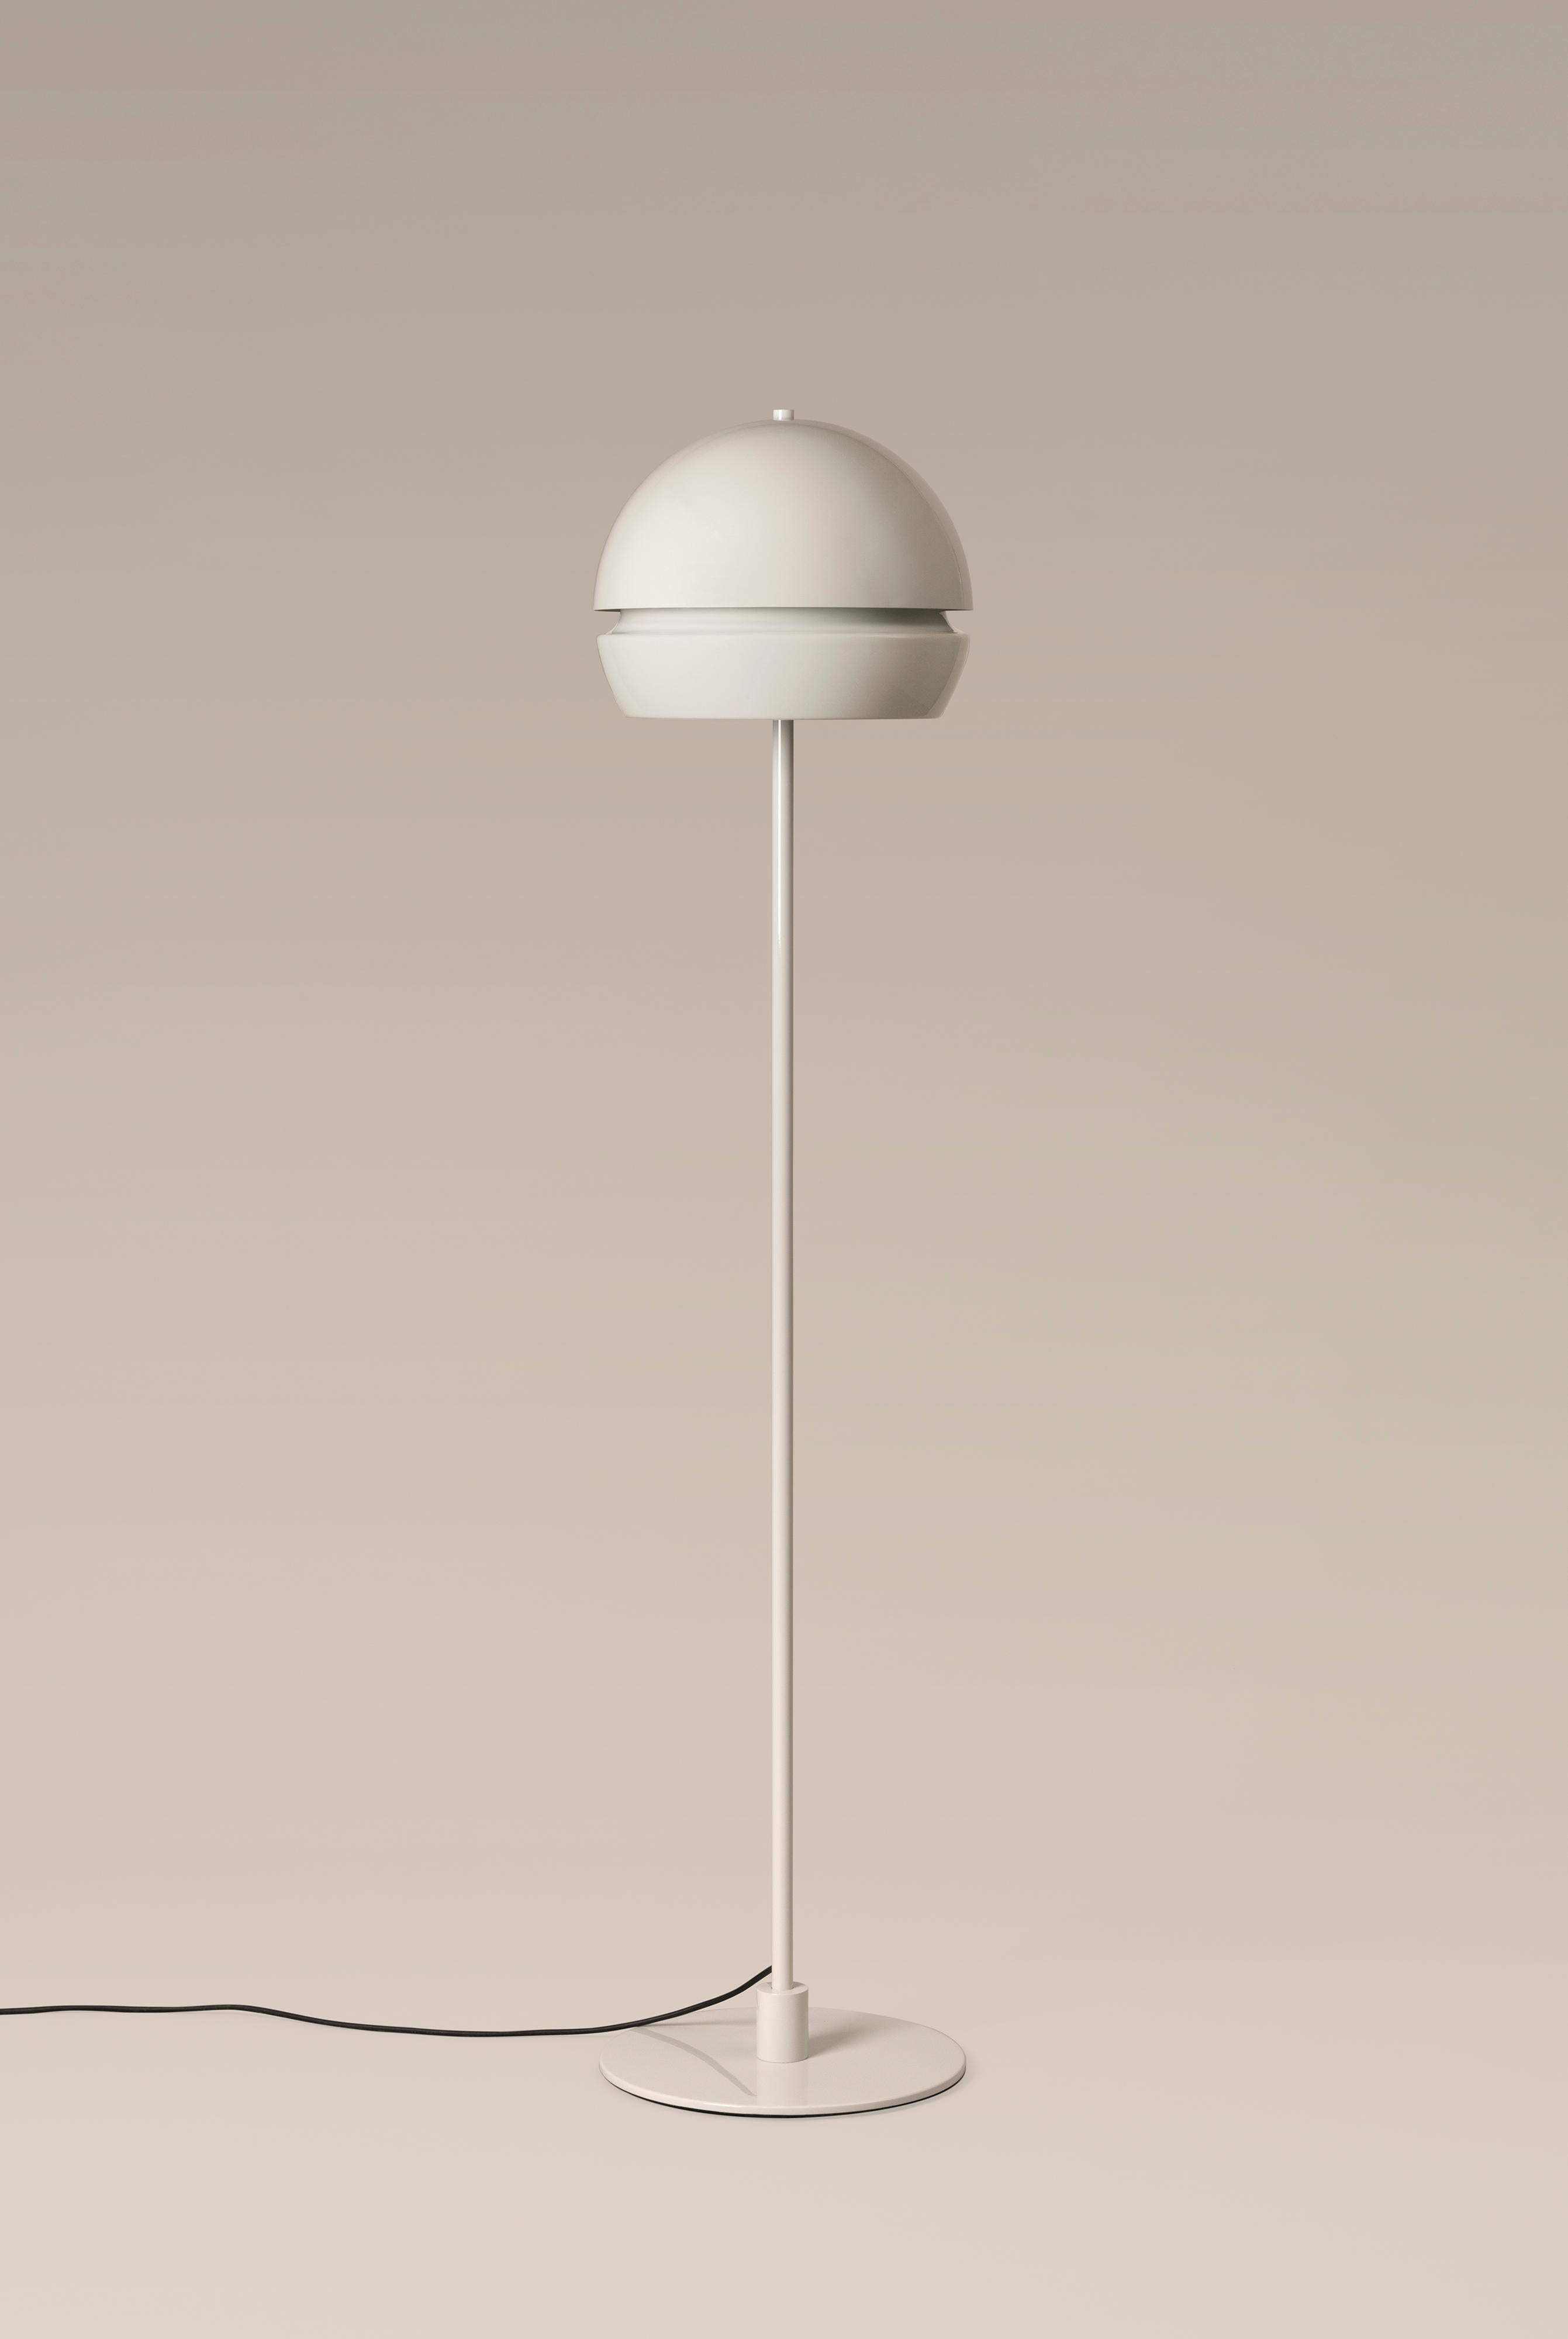 Fontana floor lamp by André Ricard
Dimensions: D 35 x H 158 cm
Materials: Metal.

Maintaining the good size of its more than half sphere lampshade and the peripheral illumination caused by its slit, we are extending the Fontana family by including